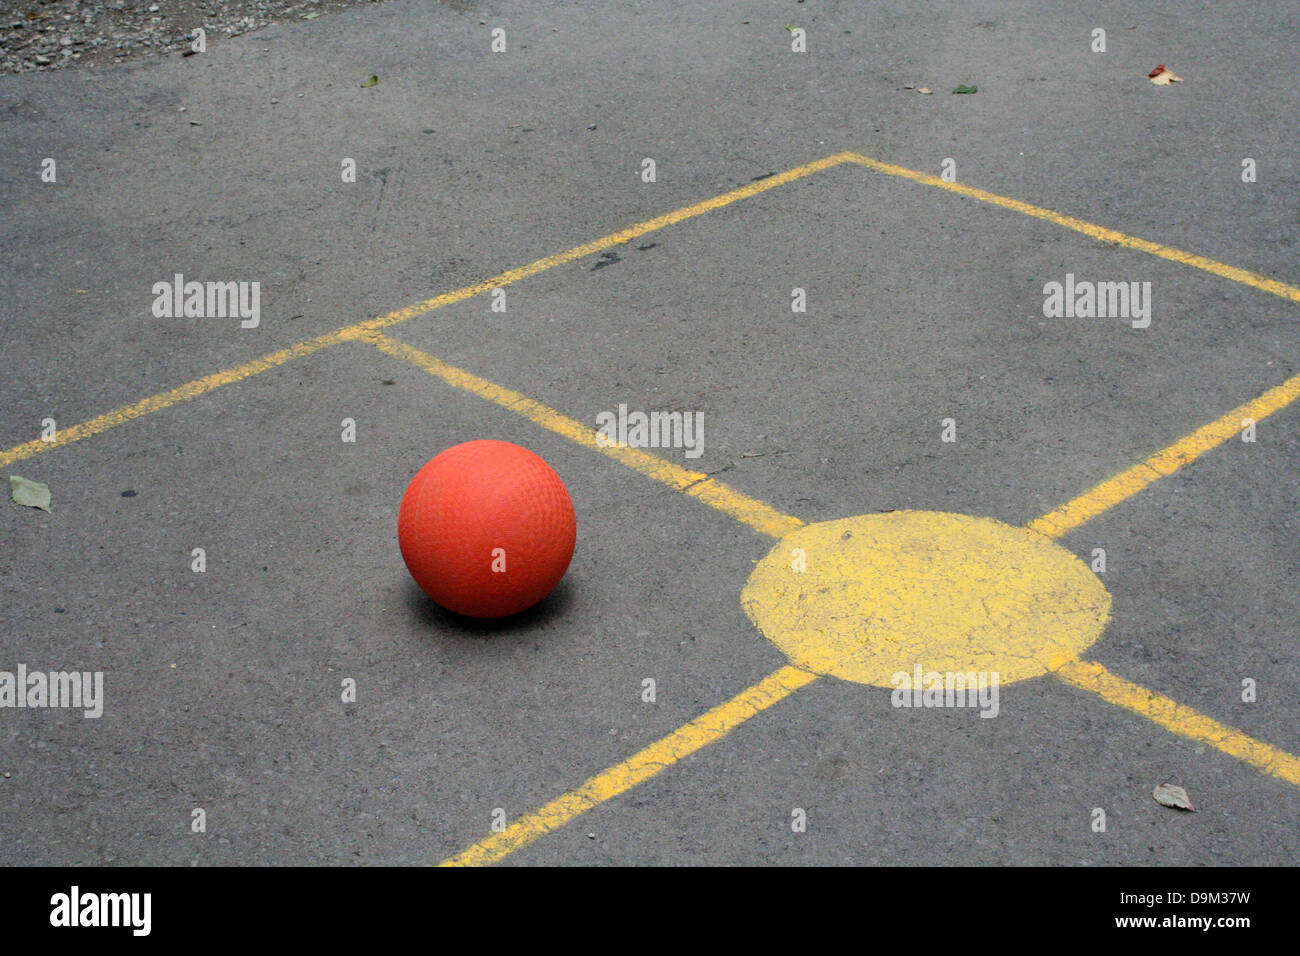 Four Square Game Stock Photos - 11,613 Images